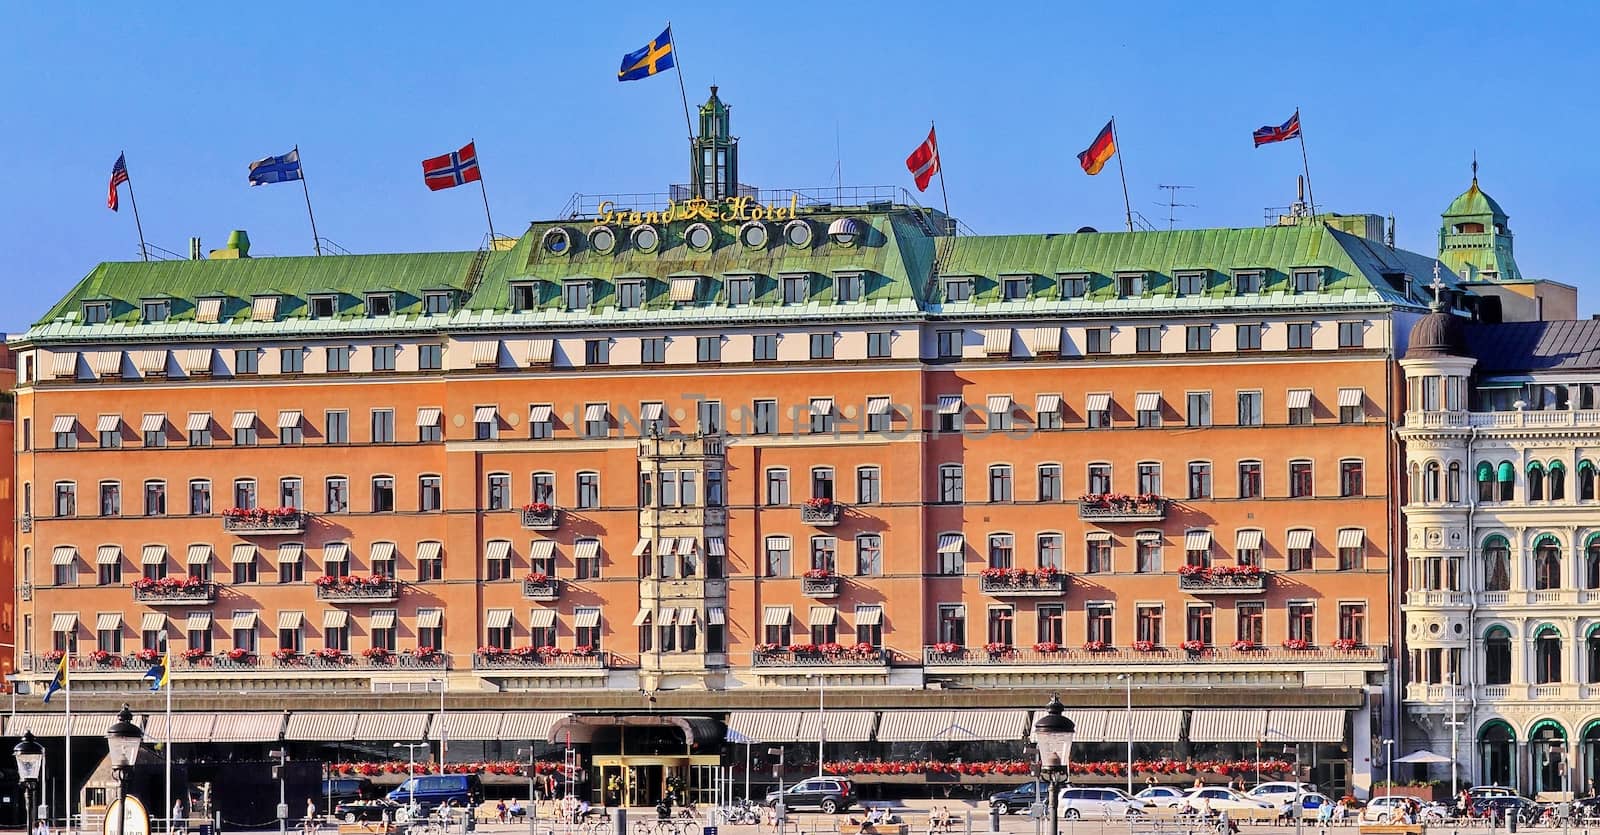 Grand Hotel Stockholm by victorych